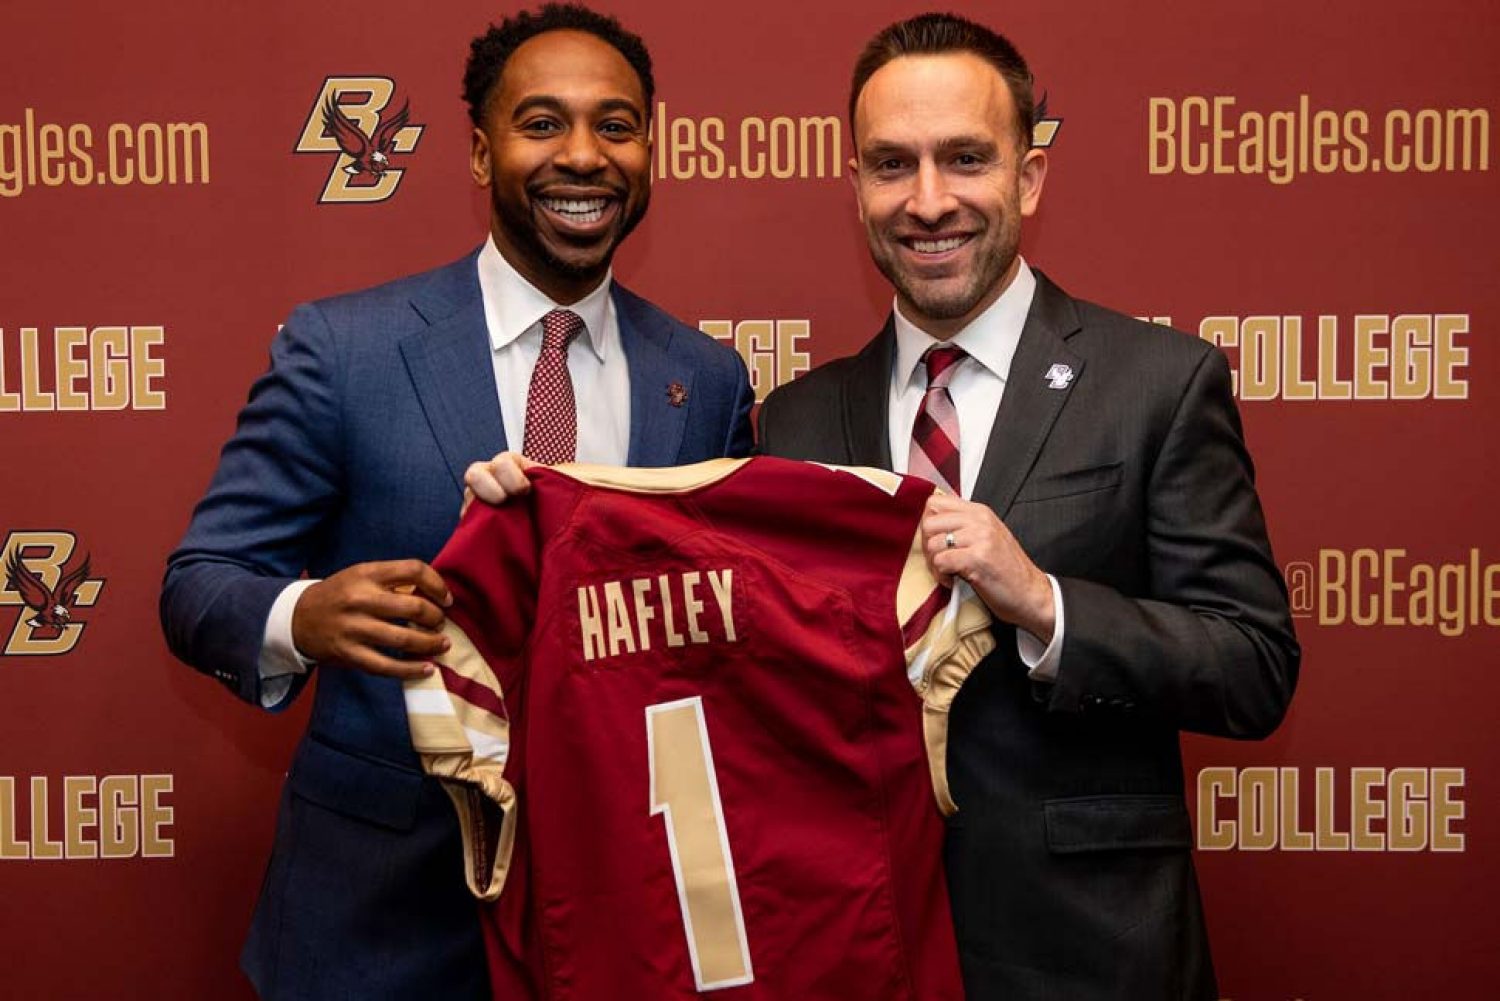 Martin Jarmond and Jeff Hafley both holding a football jersey with Hafley's name the back.